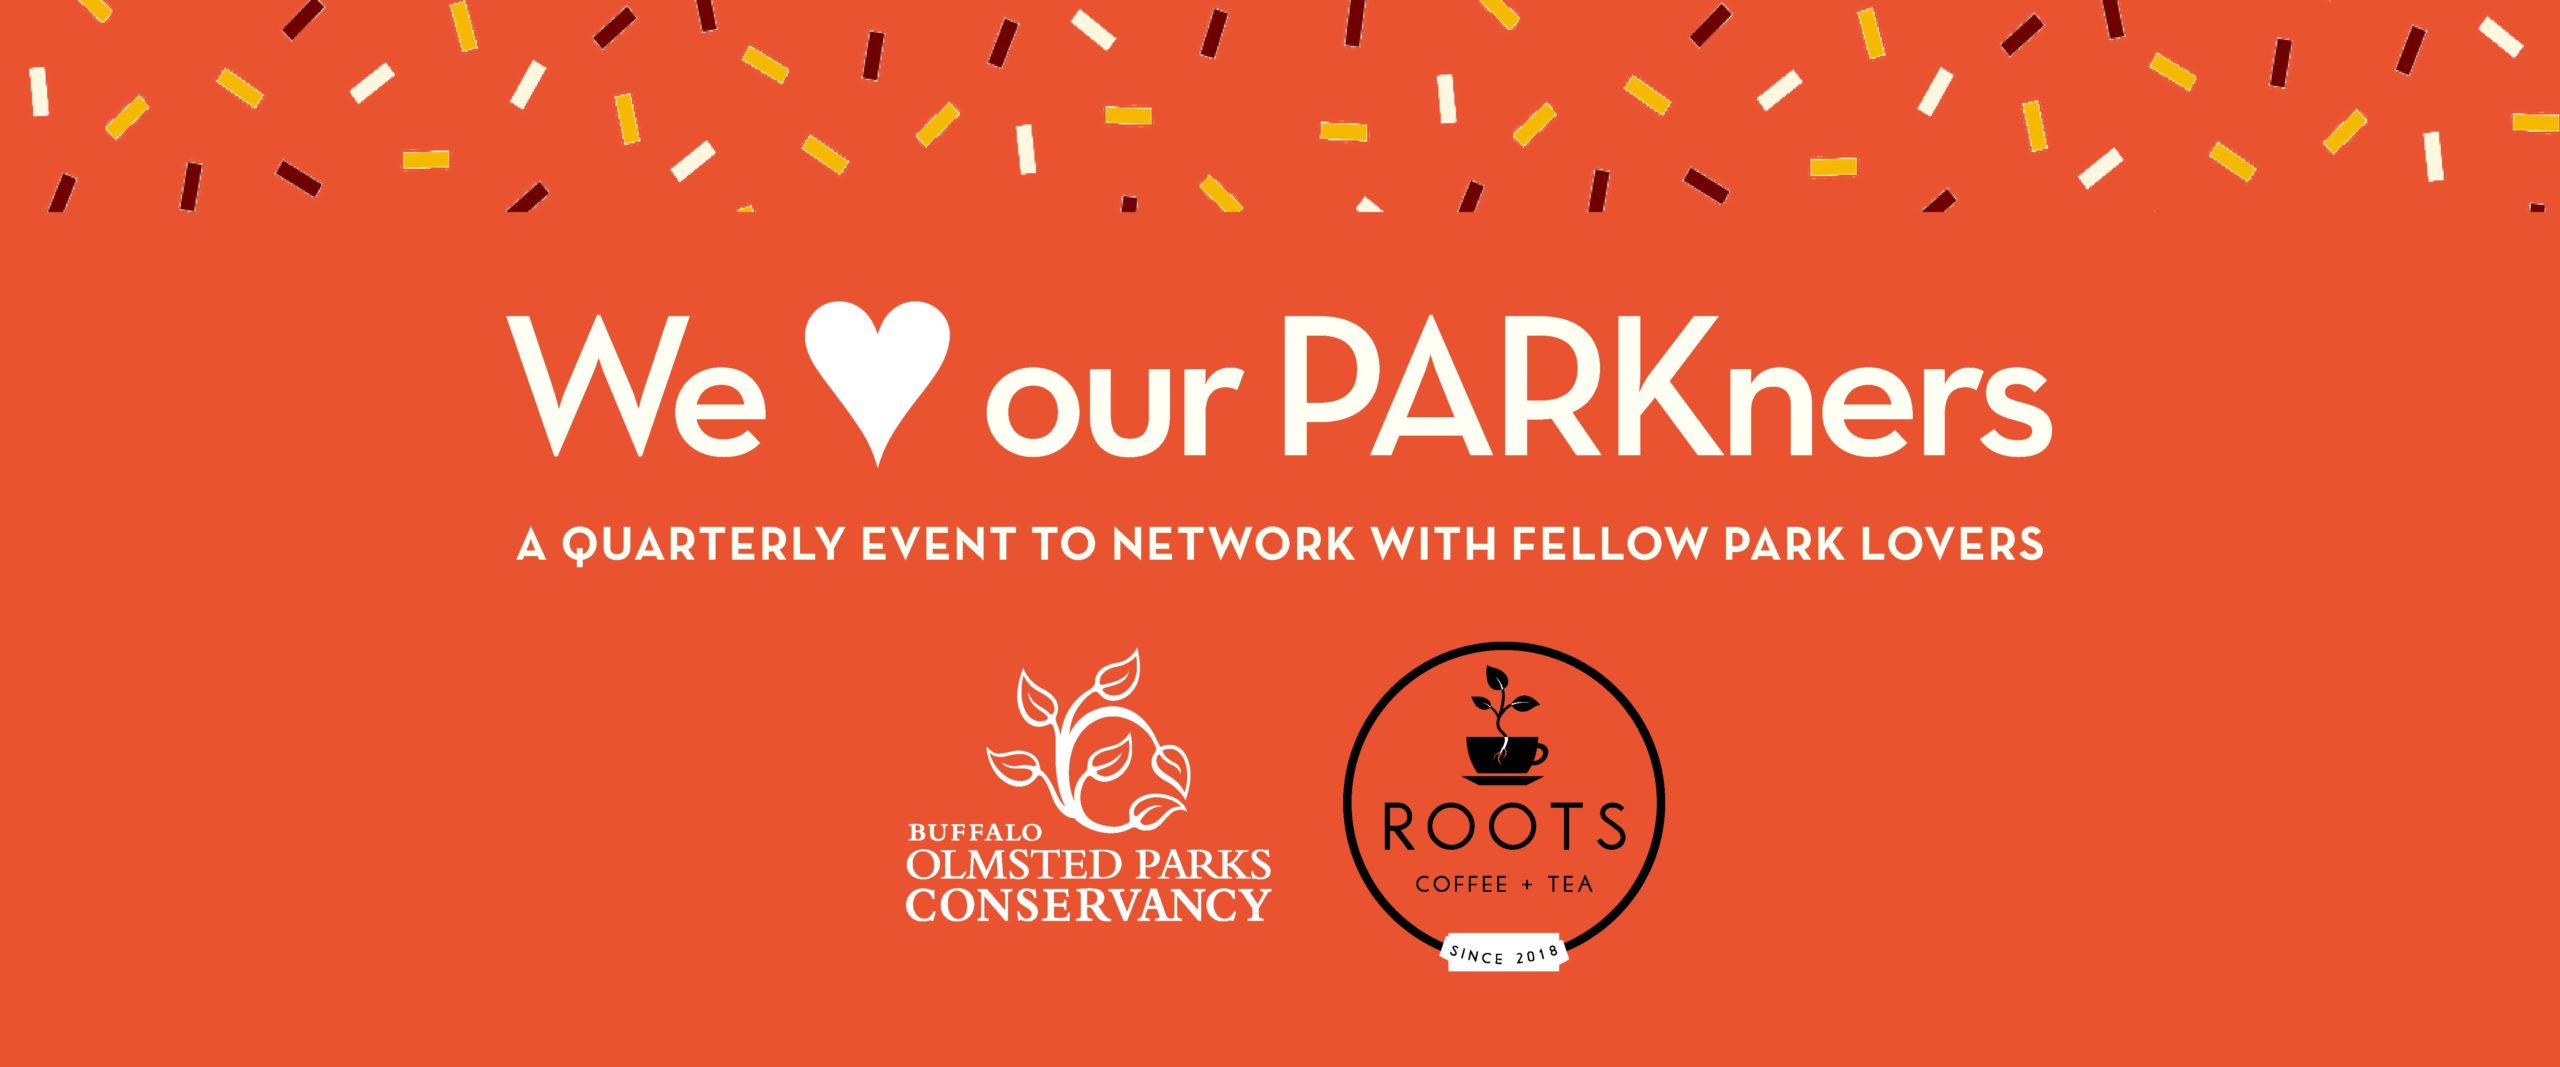 PARKner event Mar 6 at Roots Coffee and Tea